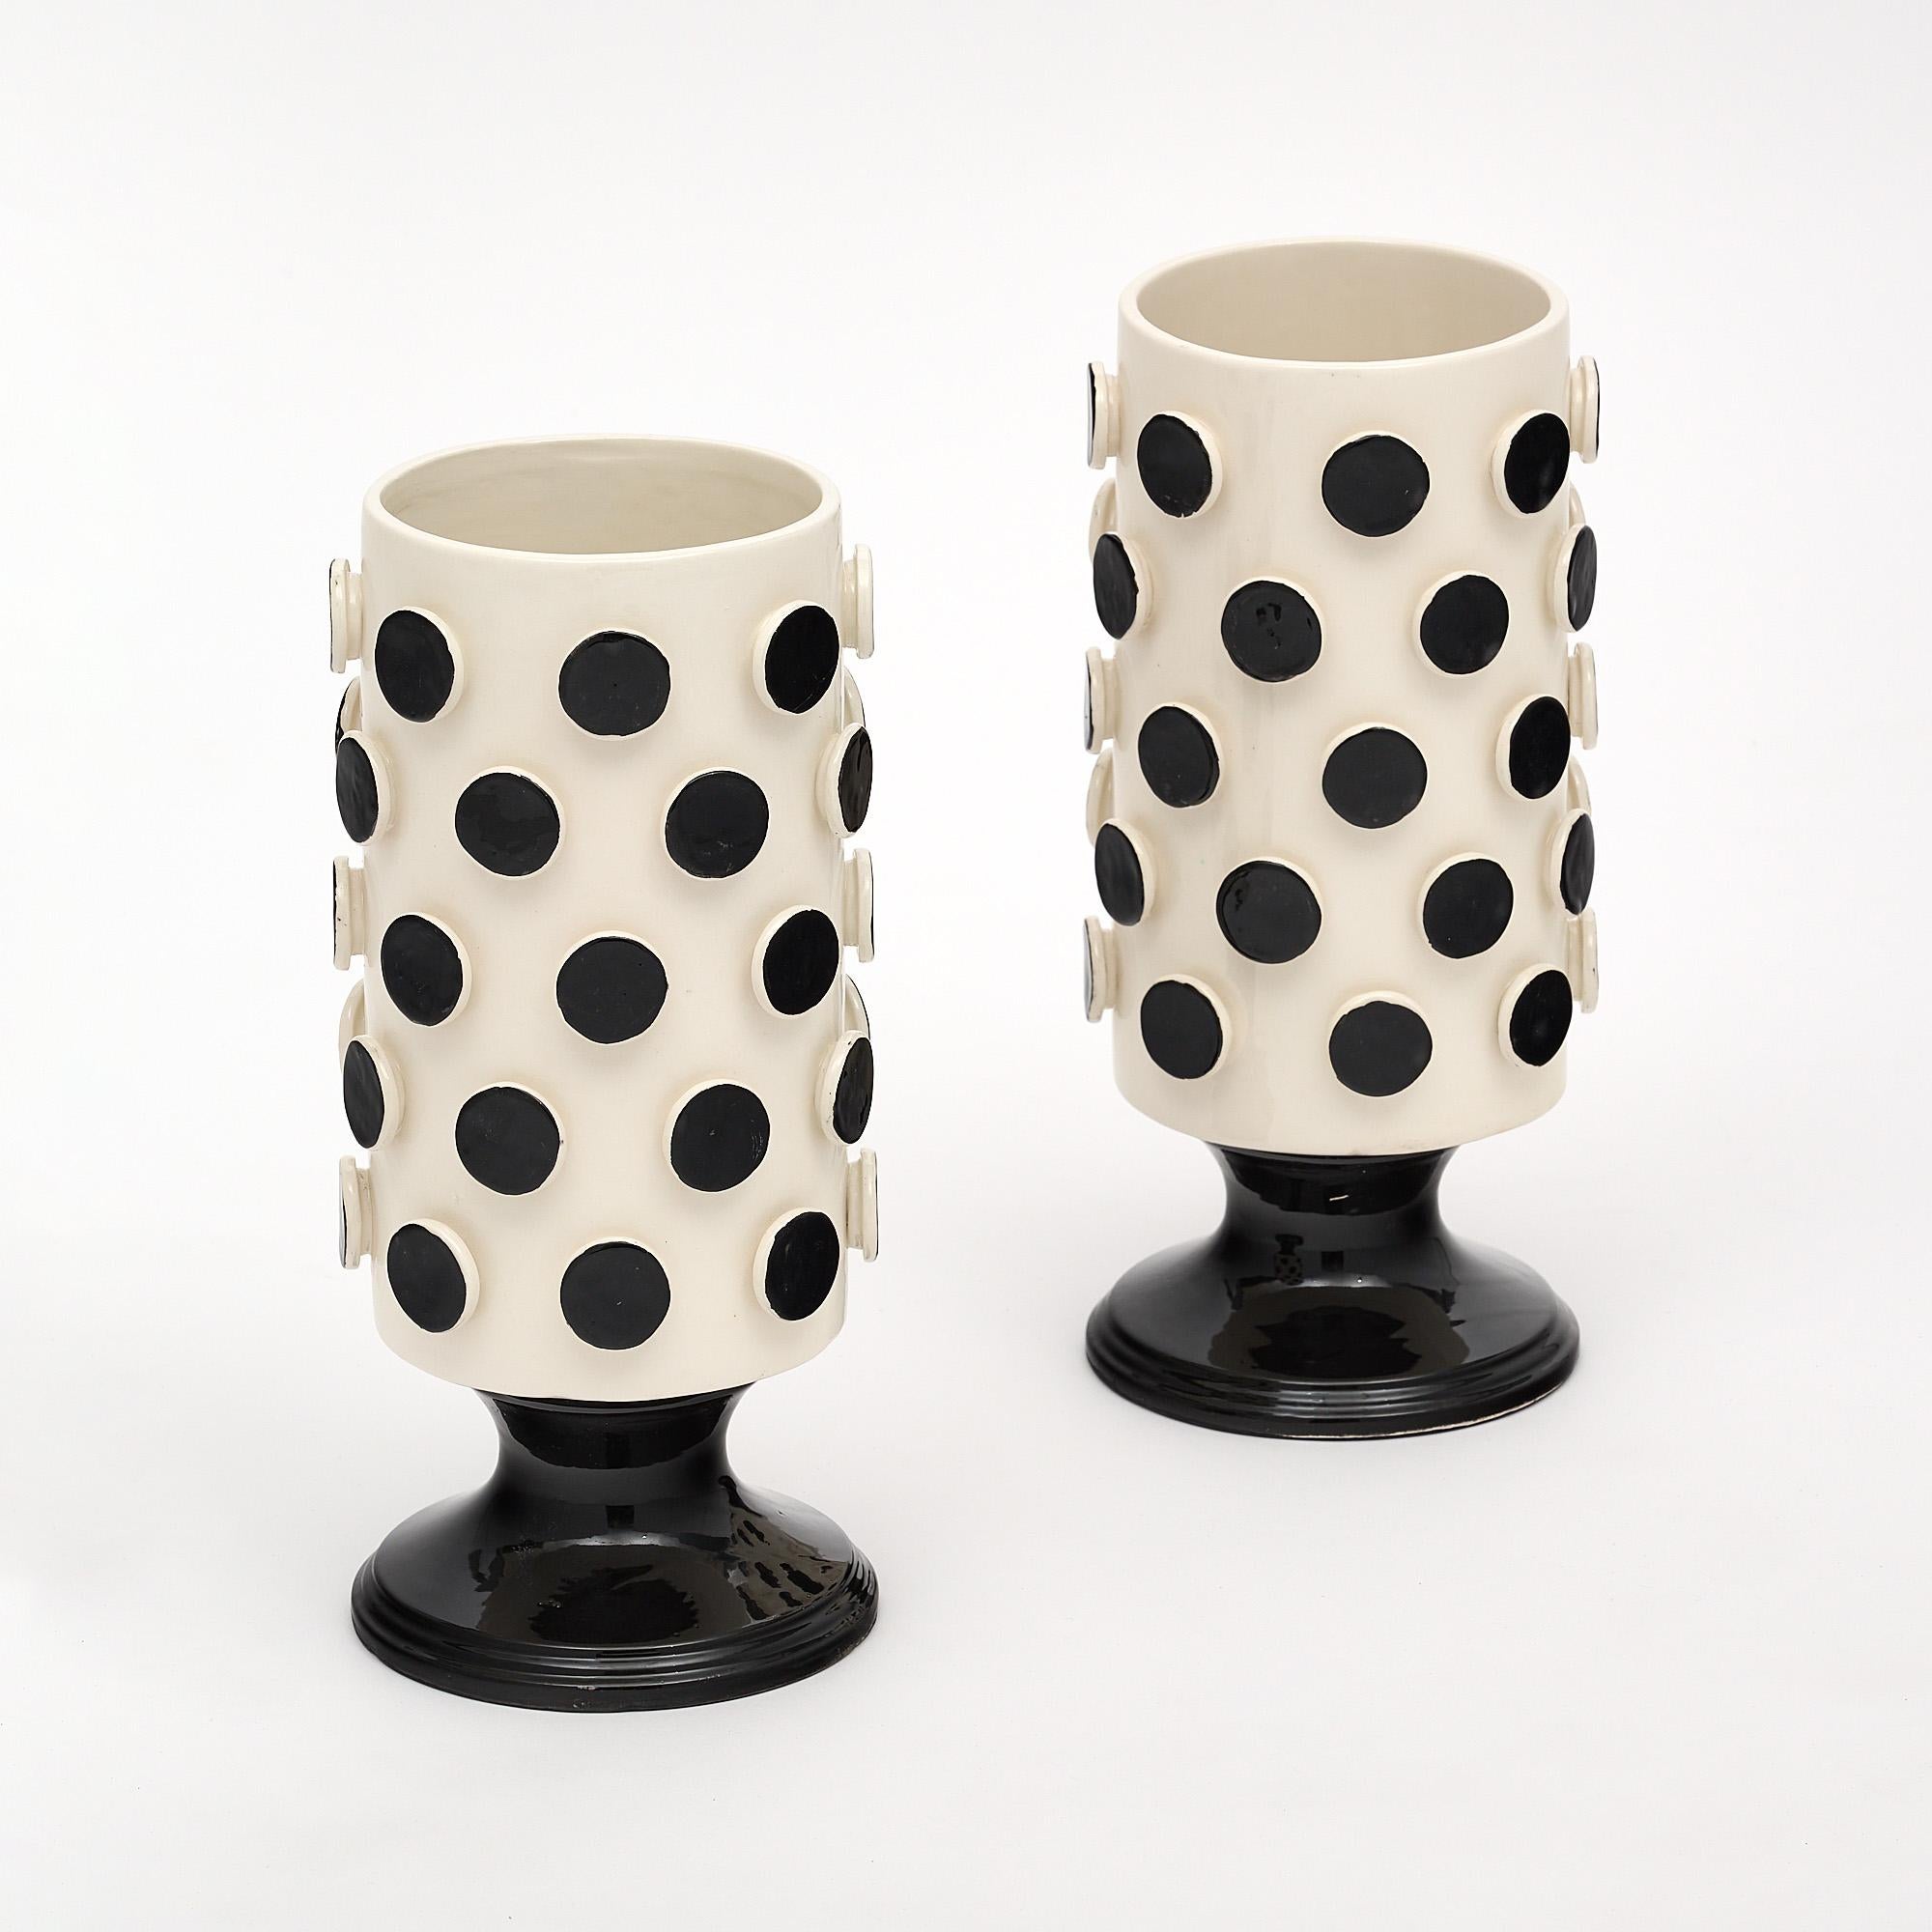 Pair of vases in the Italian Modernist style made of black and white ceramic. This hand-crafted pair is from Verona and signed MC.
 